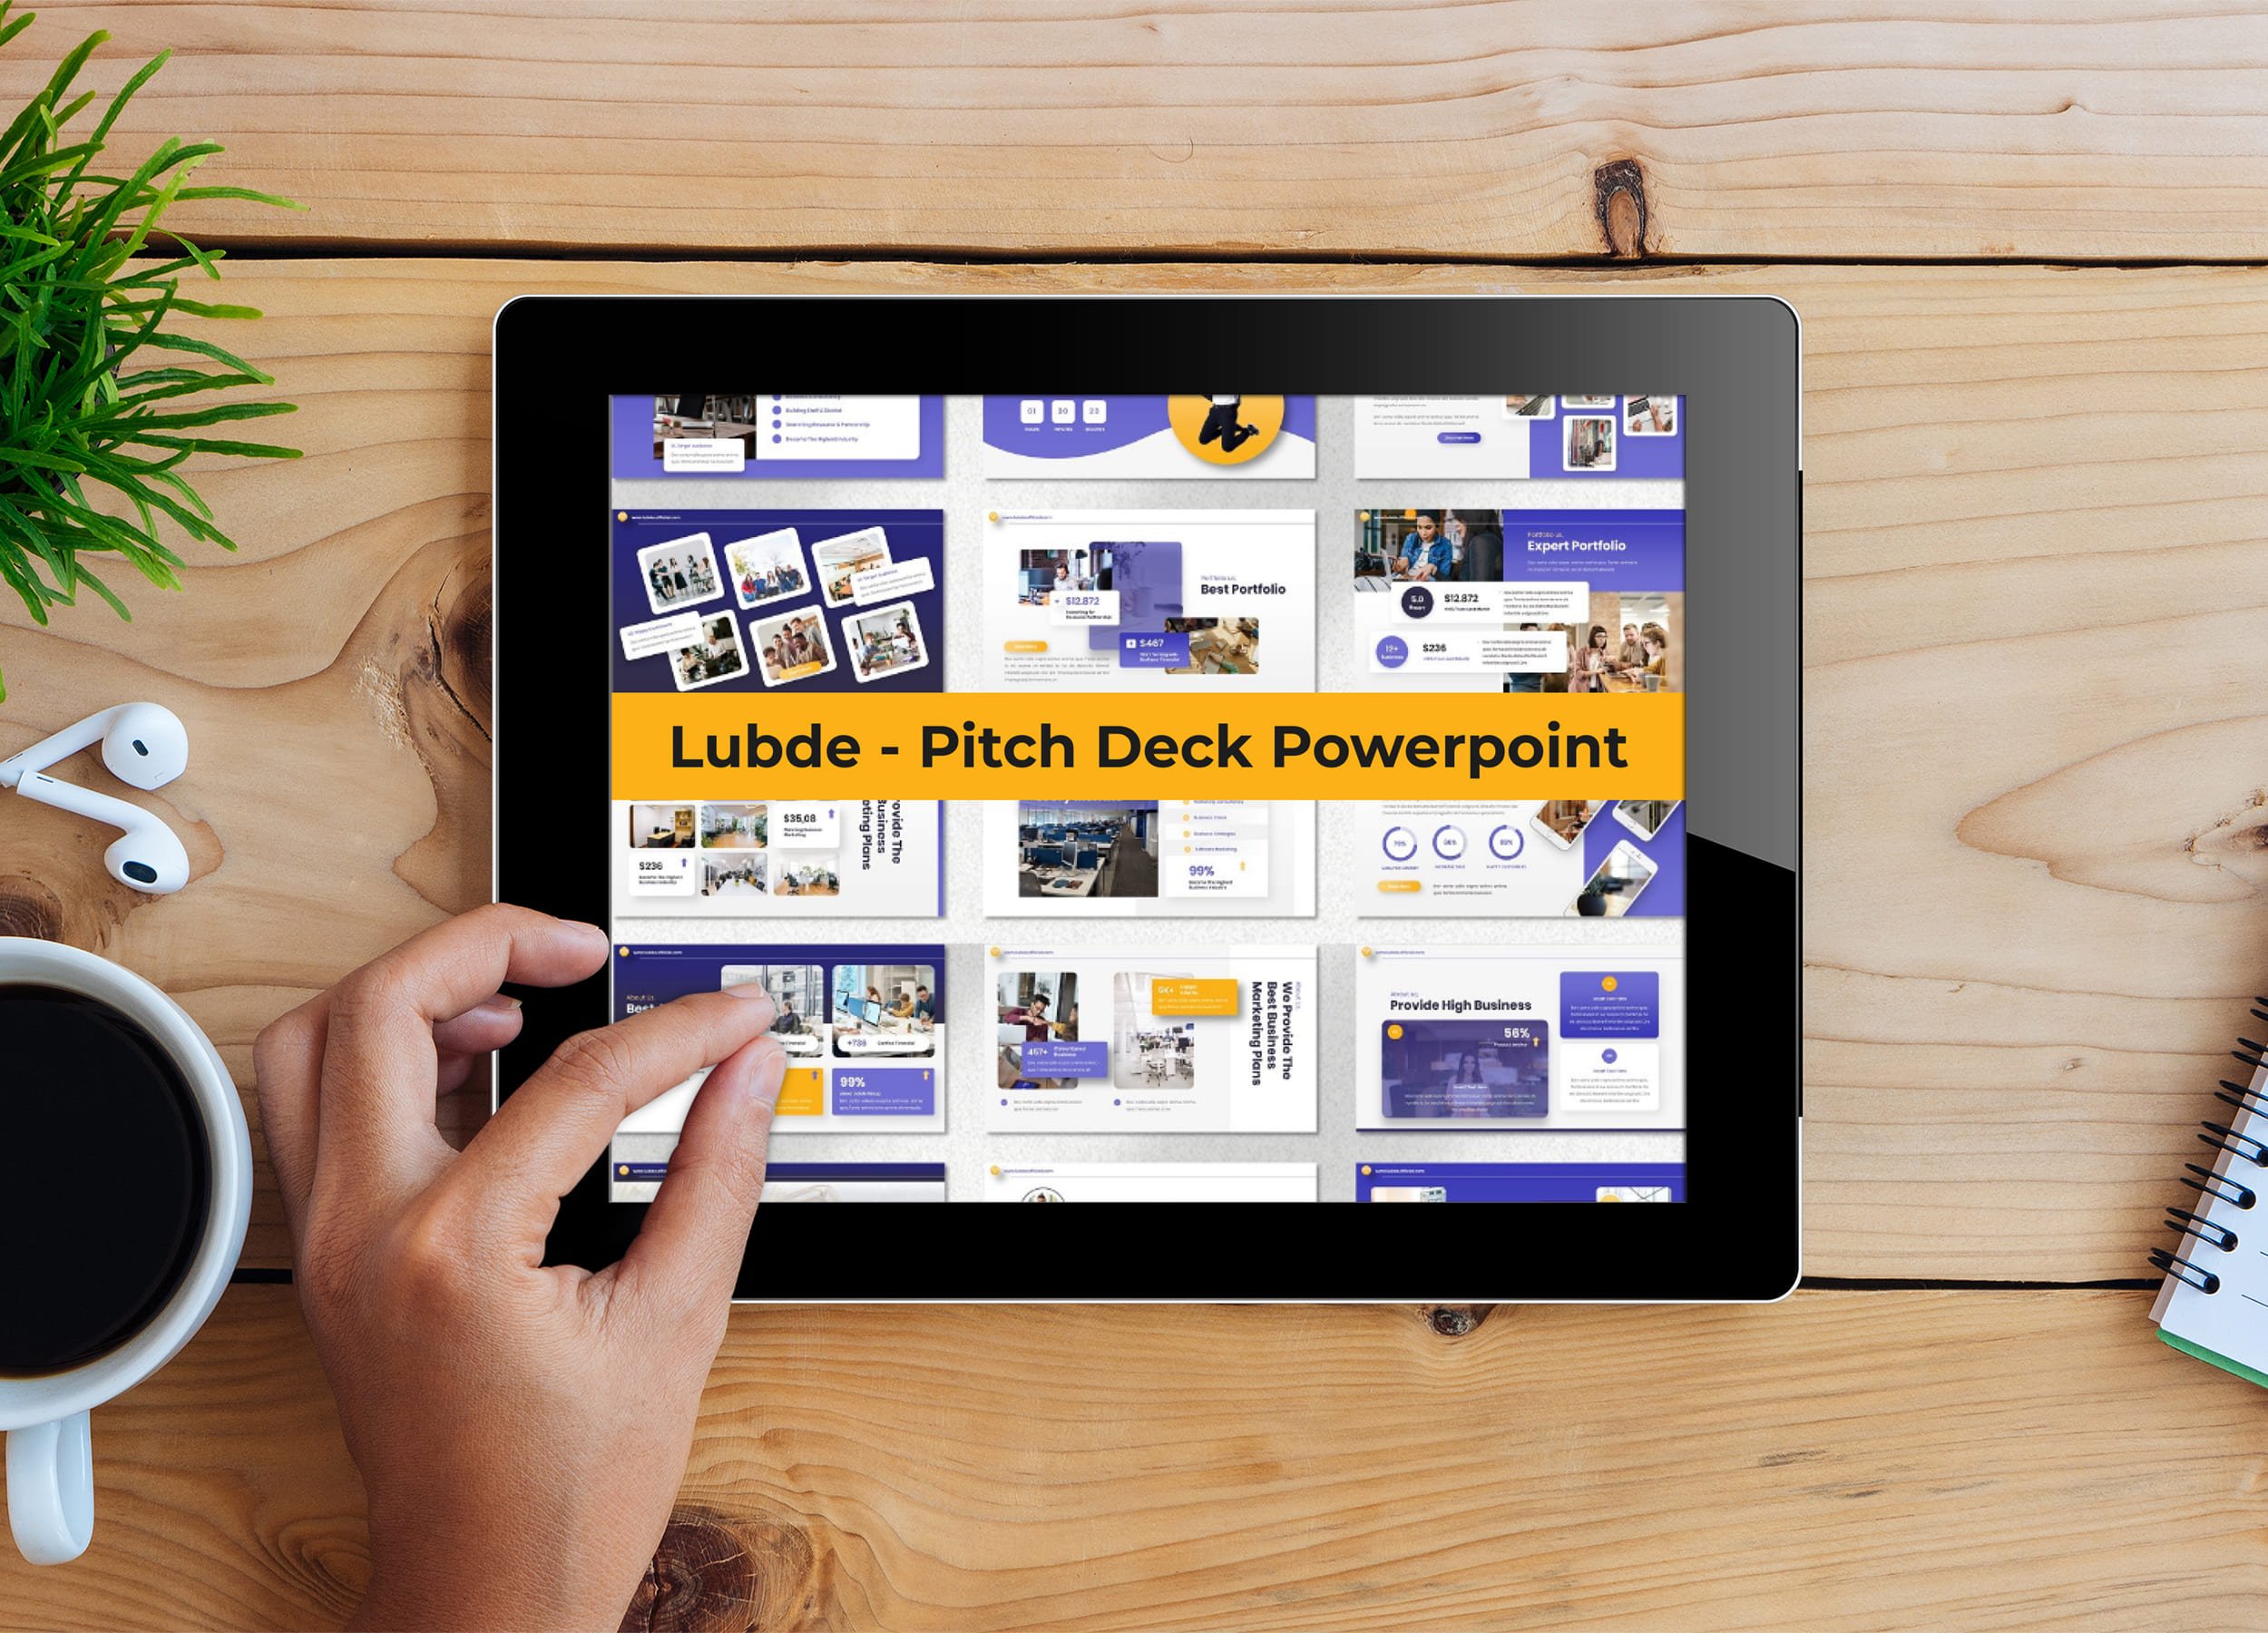 Tablet option of the Lubde - Pitch Deck Powerpoint.